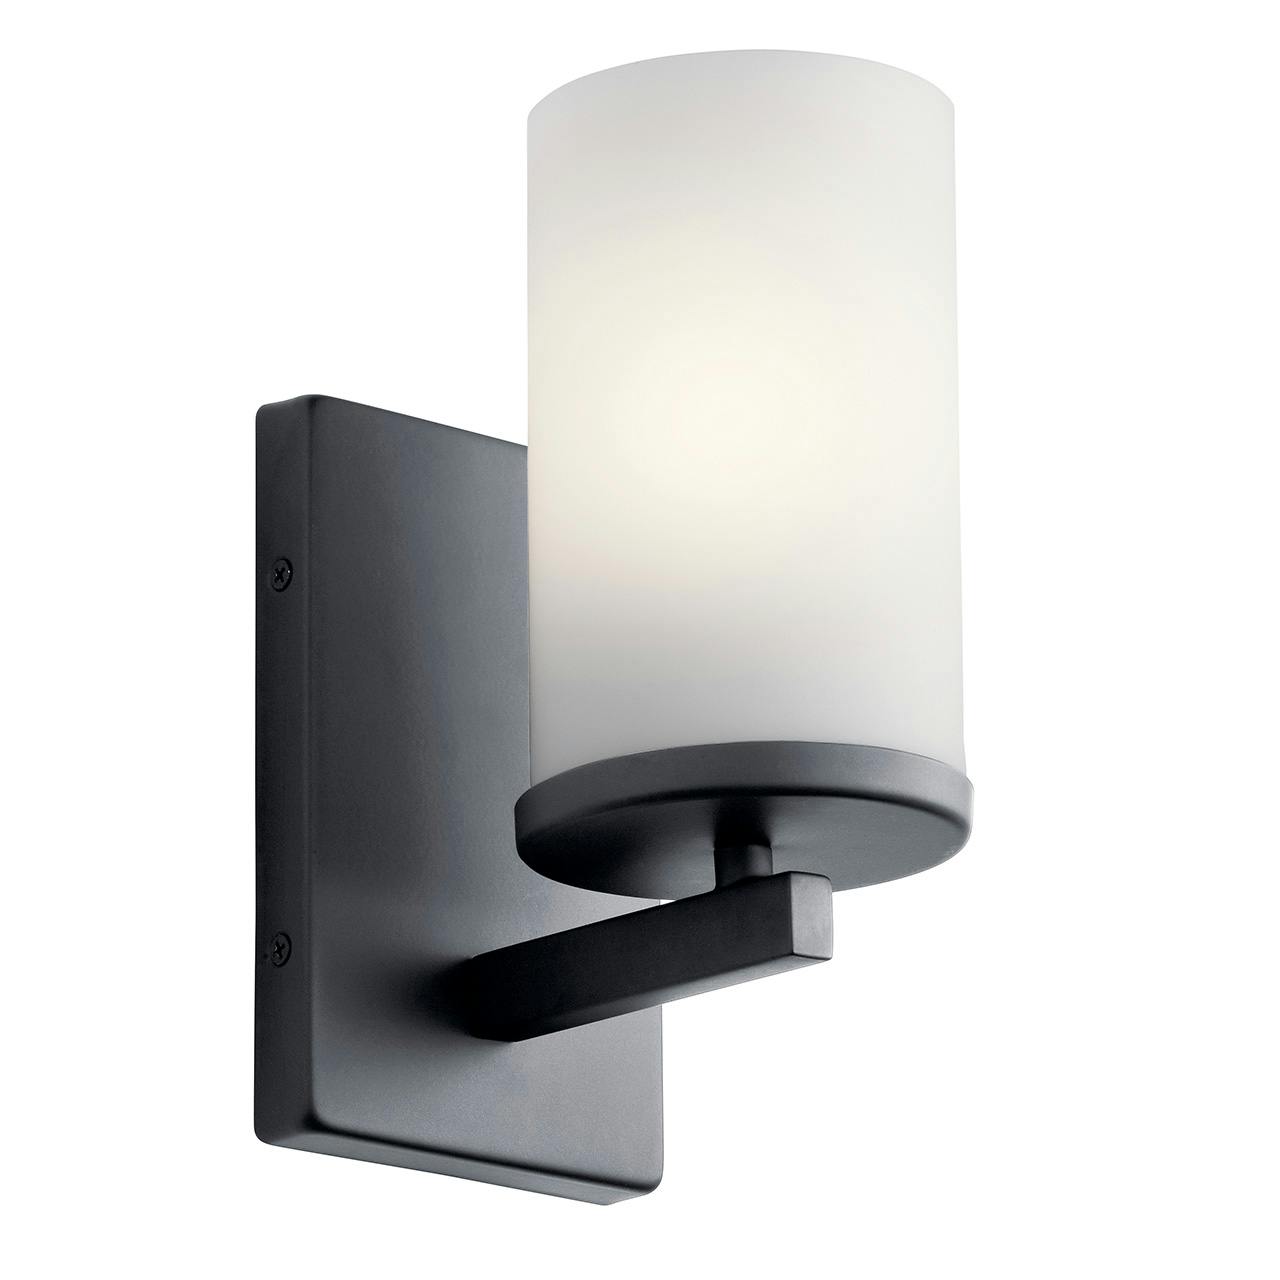 Crosby 1 Light Wall Sconce Black on a white background